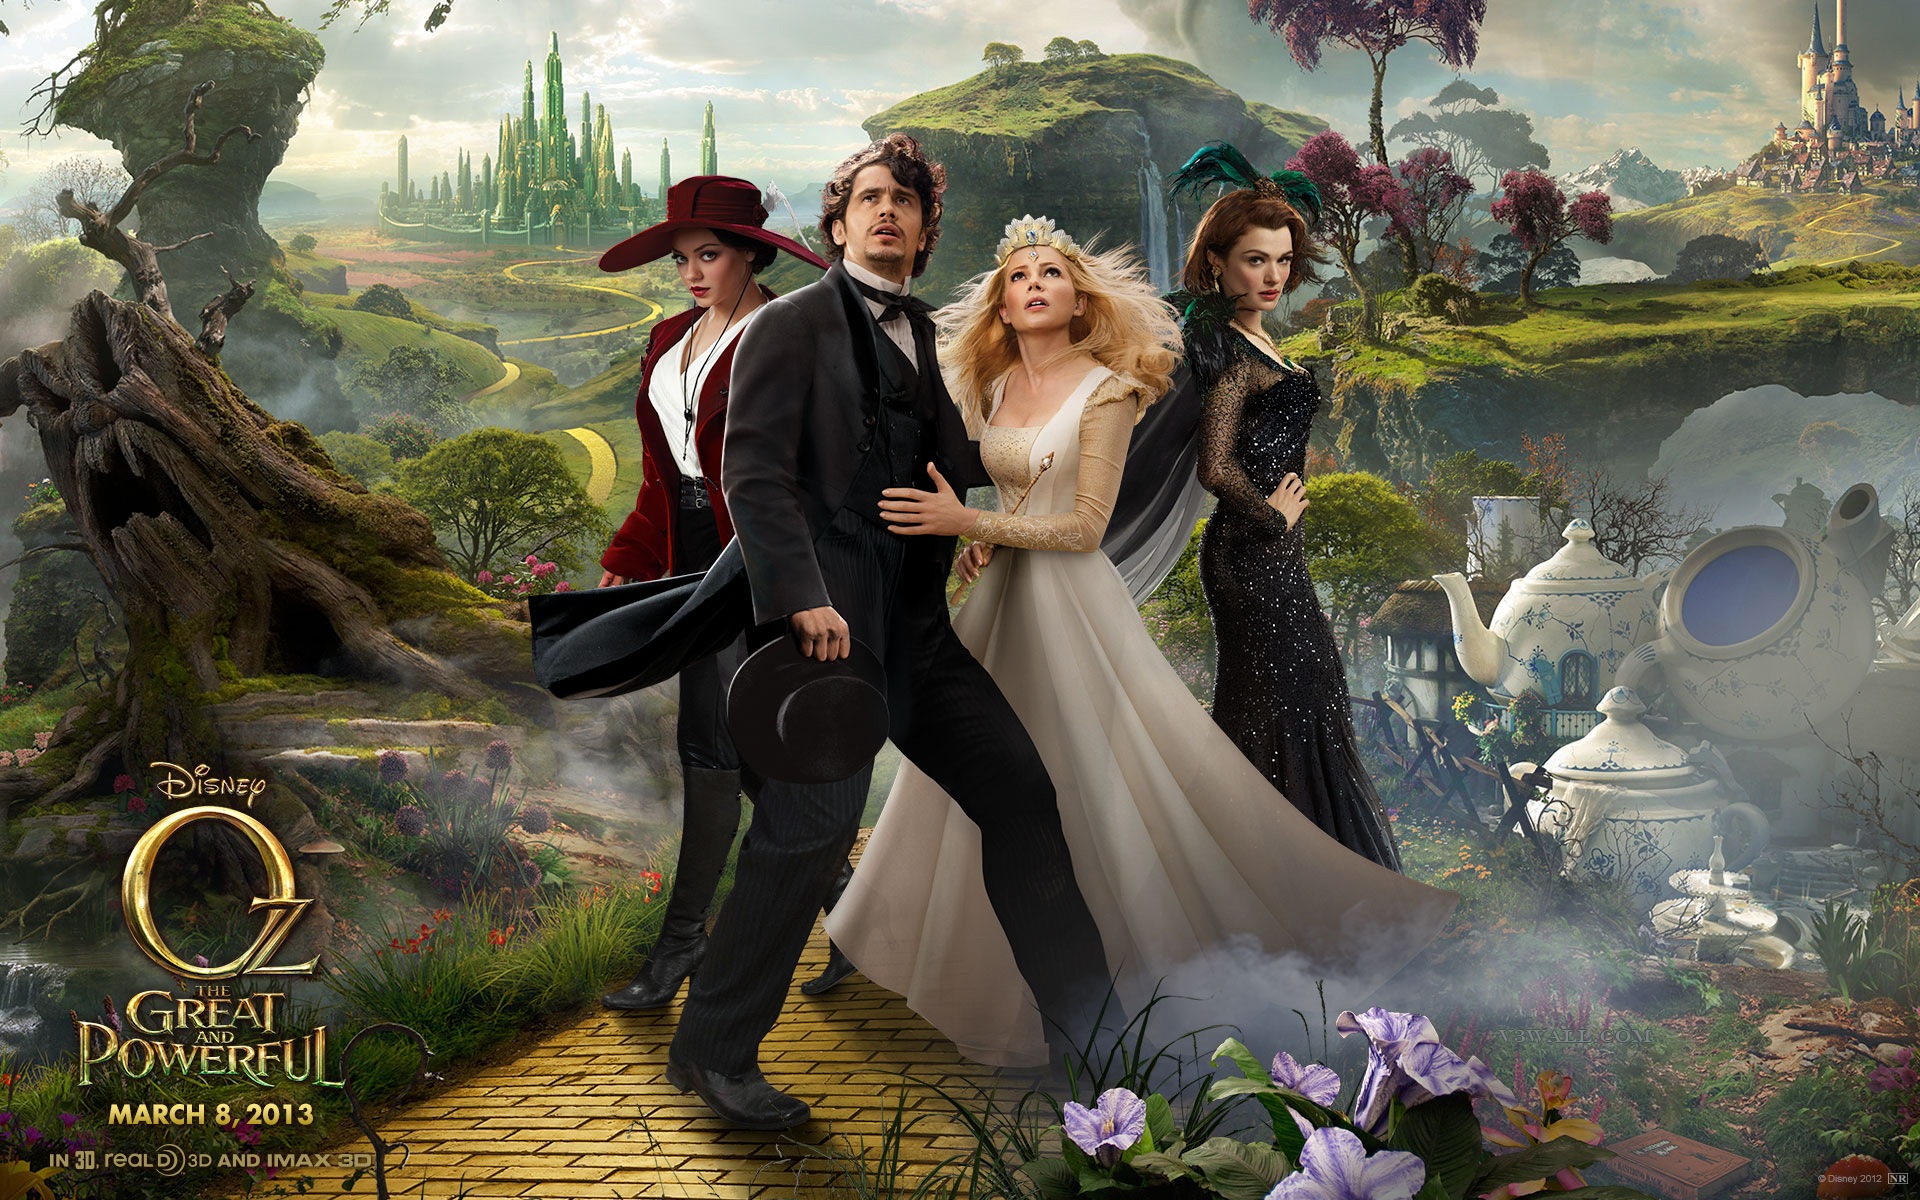 Oz The Great and Powerful 2013 HD wallpapers #1 - 1920x1200